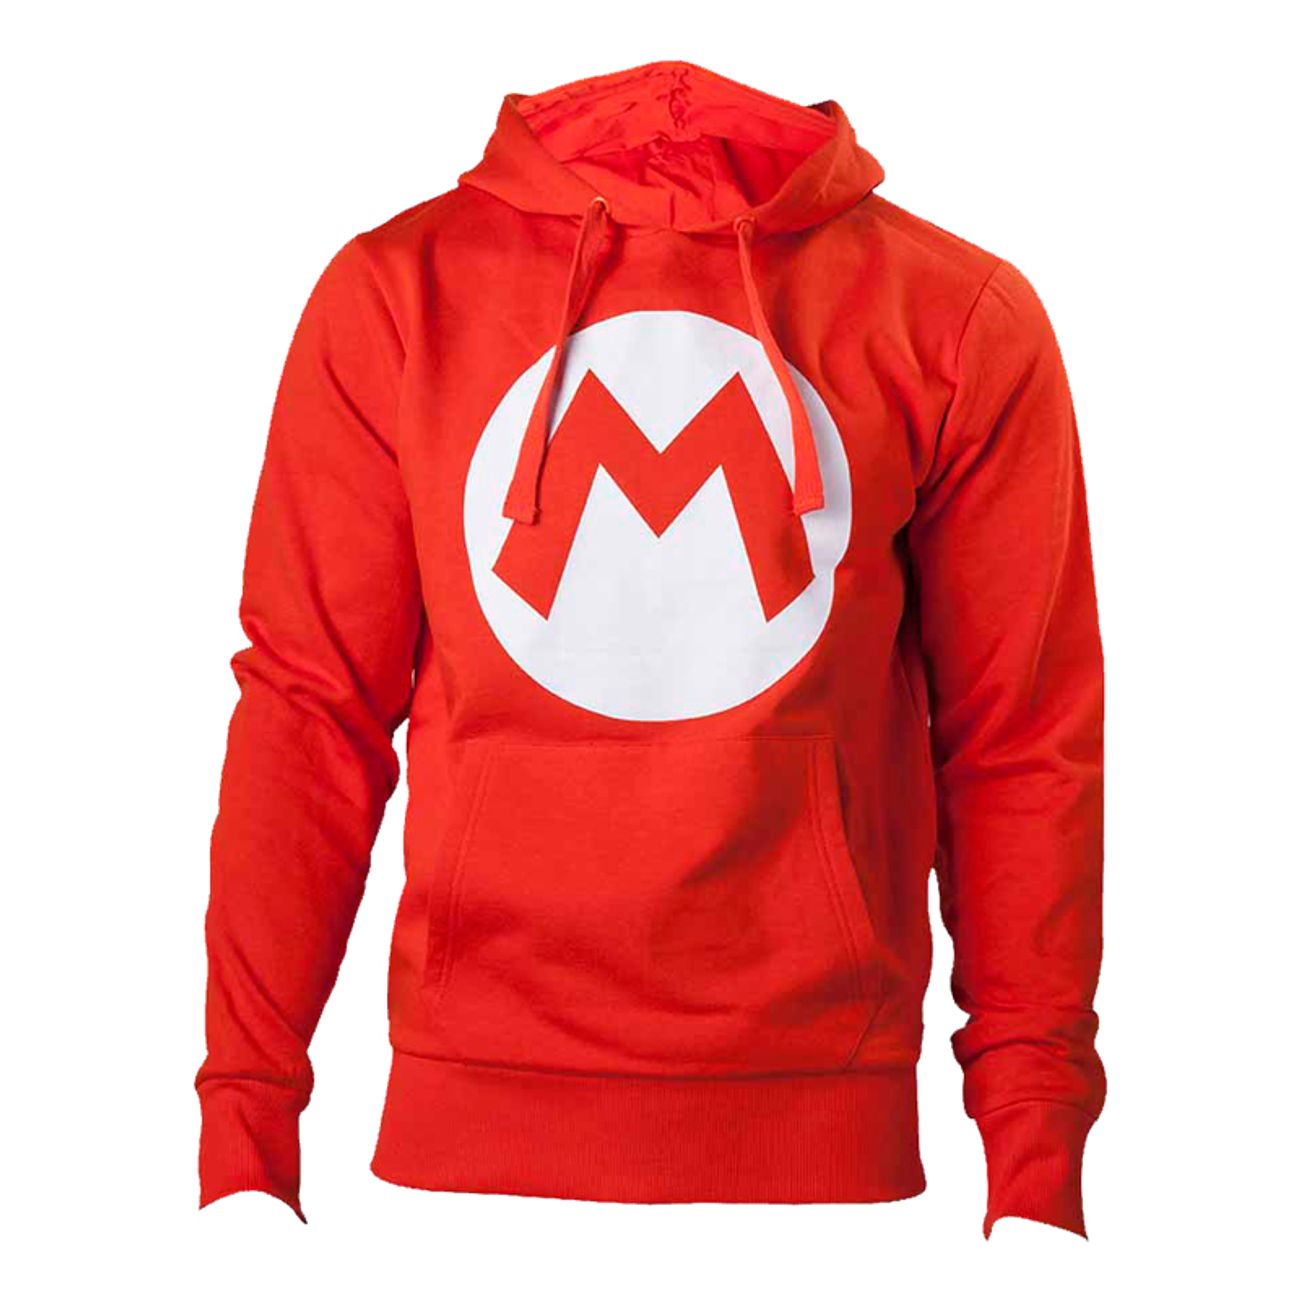 nintendo-red-hoodie-with-m-logo-in-front-2xl-1